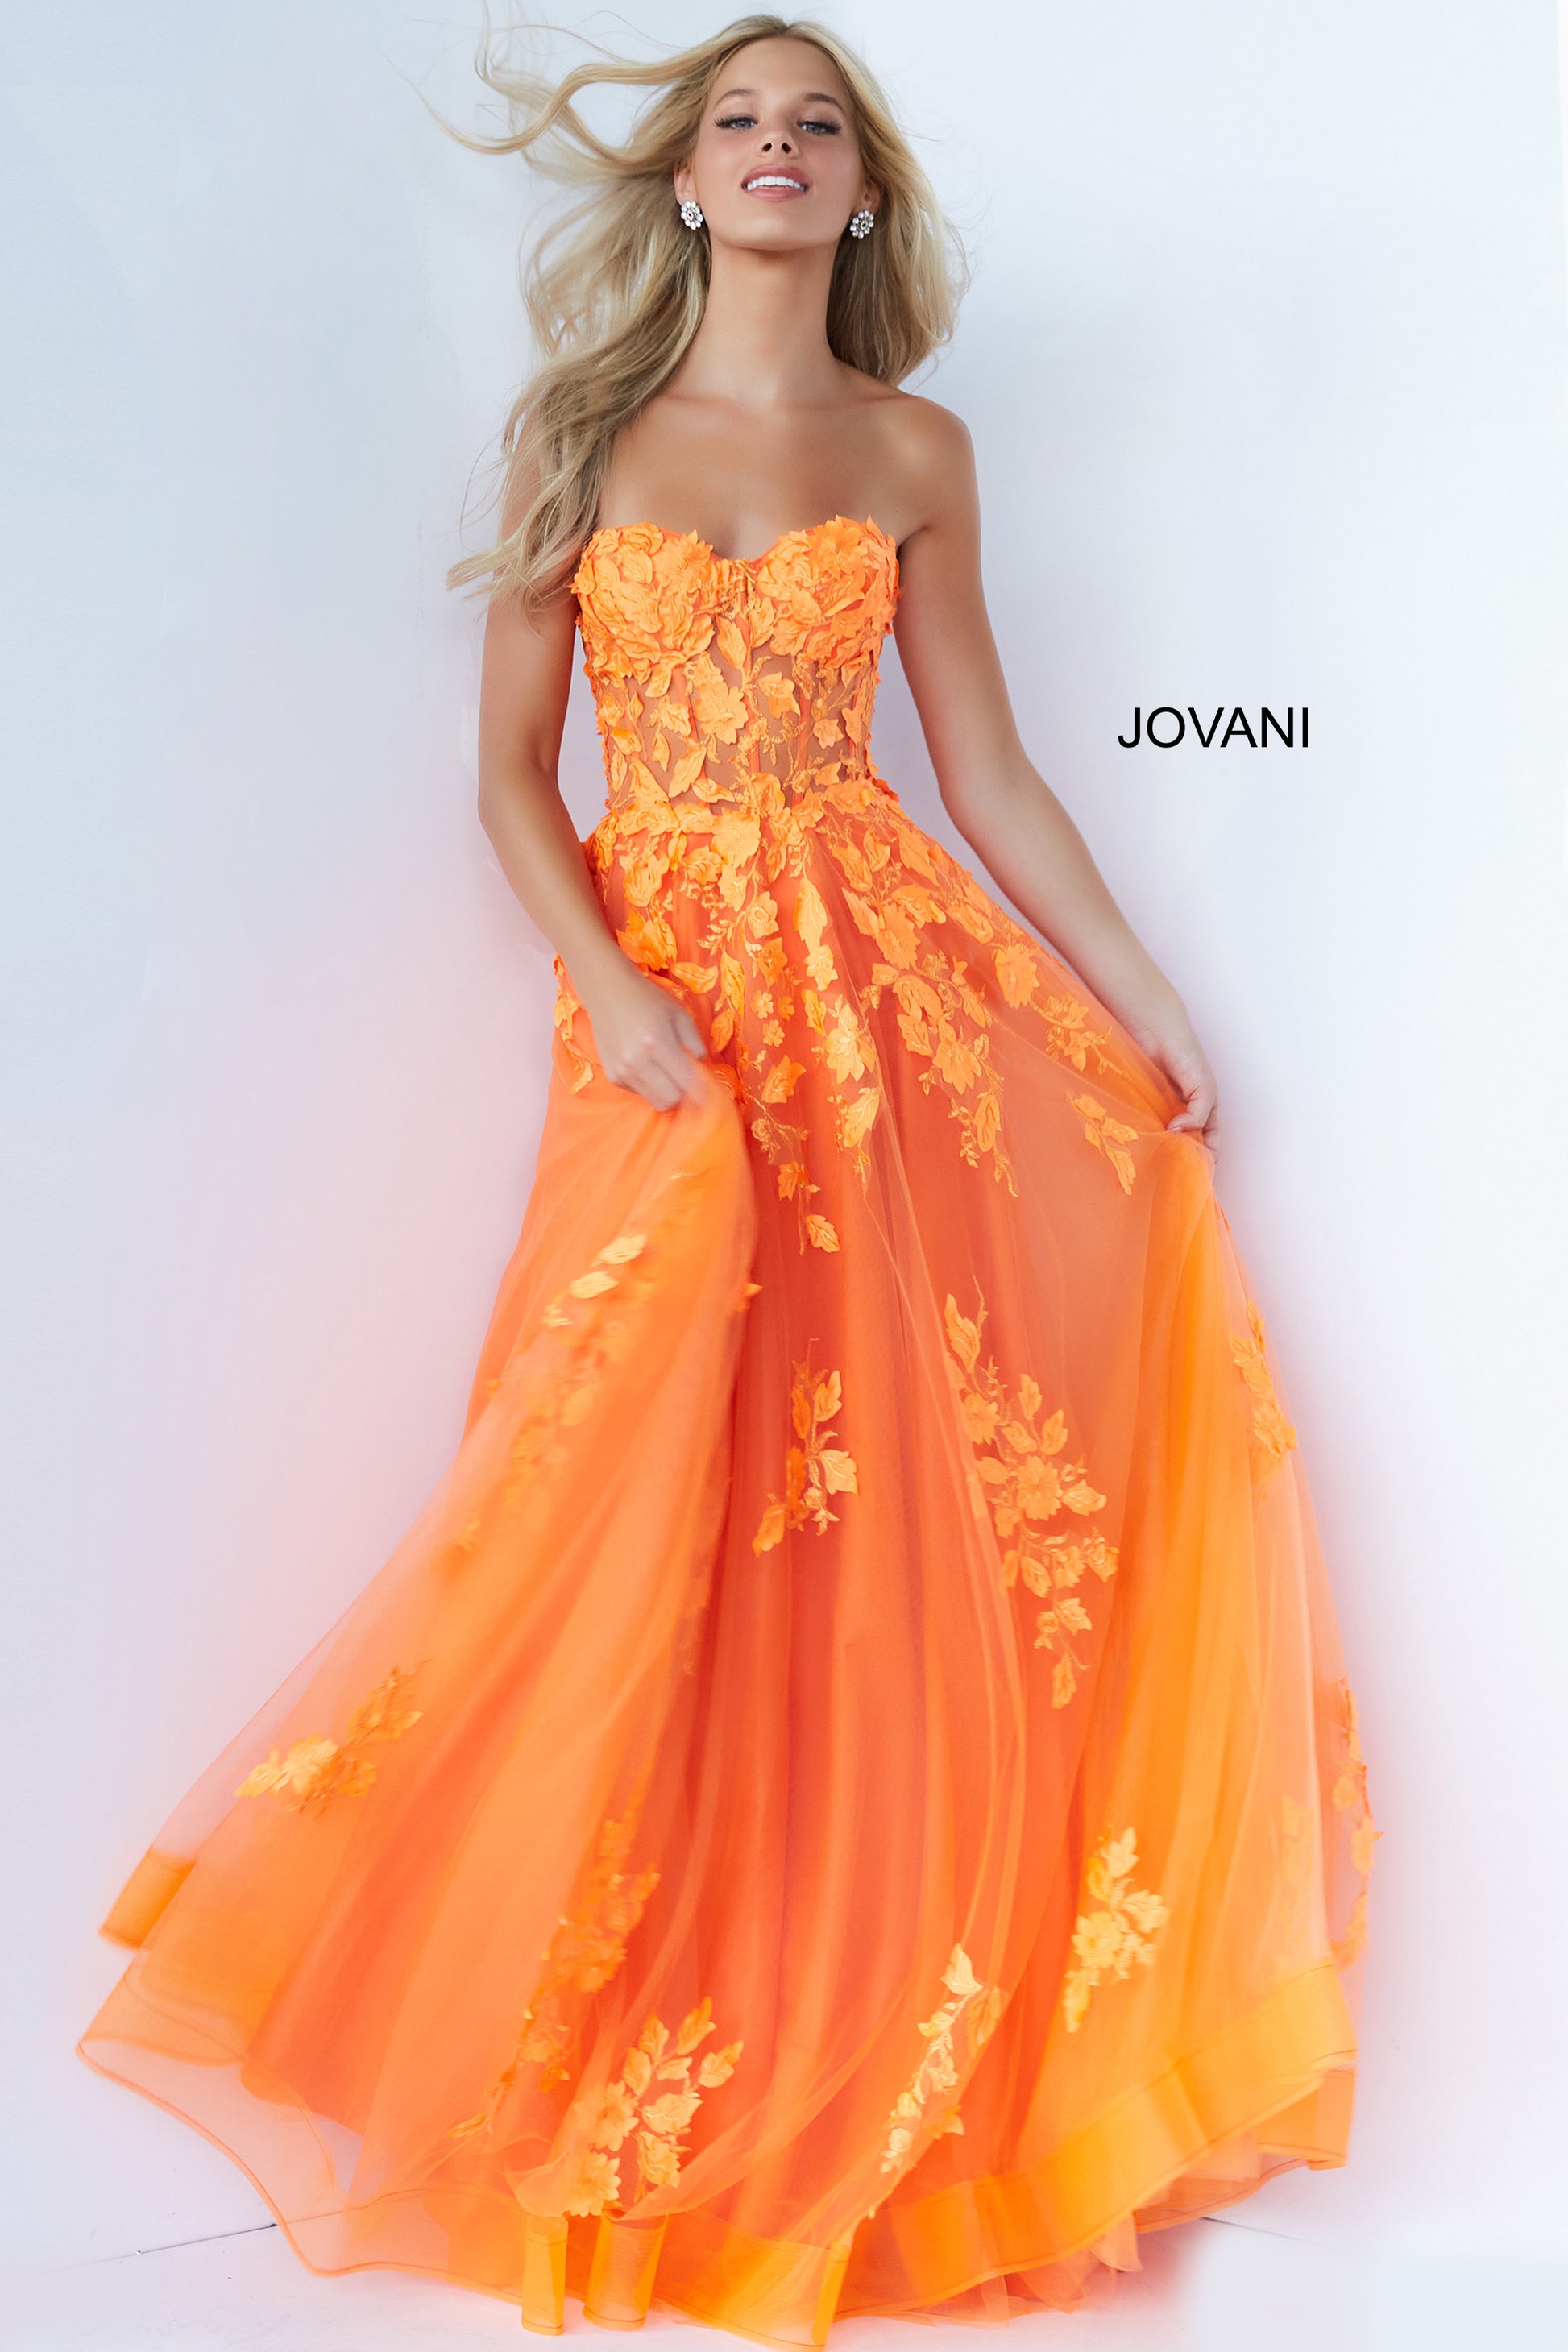 Jovani 07901 Long Ballgown Prom Pageant Gown Sheer Floral A Line Dress  Available Size- 00-24  Available Color- Red, Orange, Black, Off White